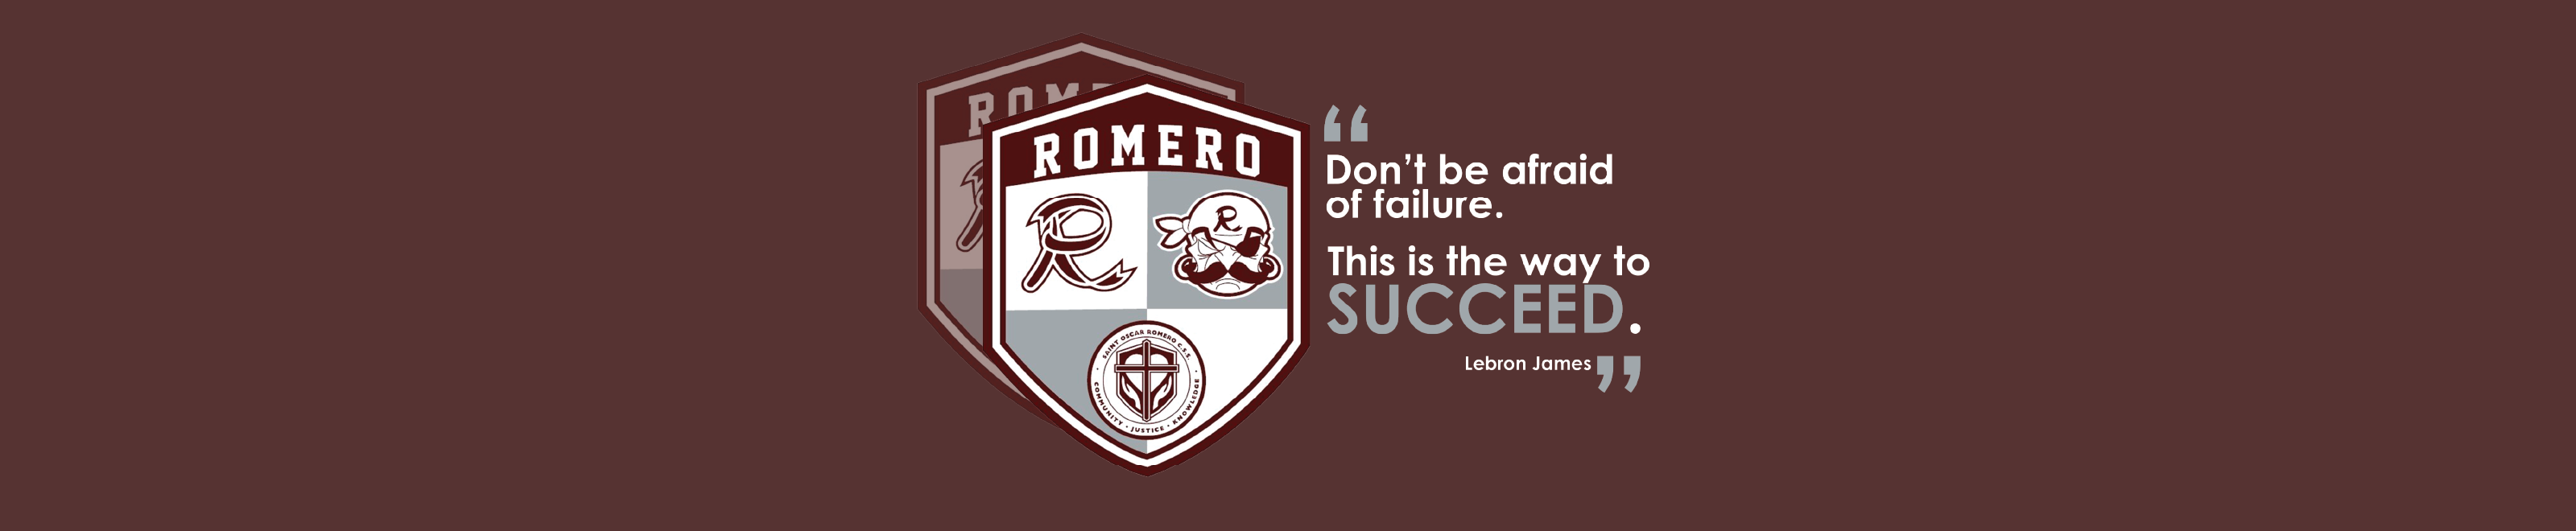 School logo with the quote "Don't be afraid of failure. This is the way to succeed." Lebron James